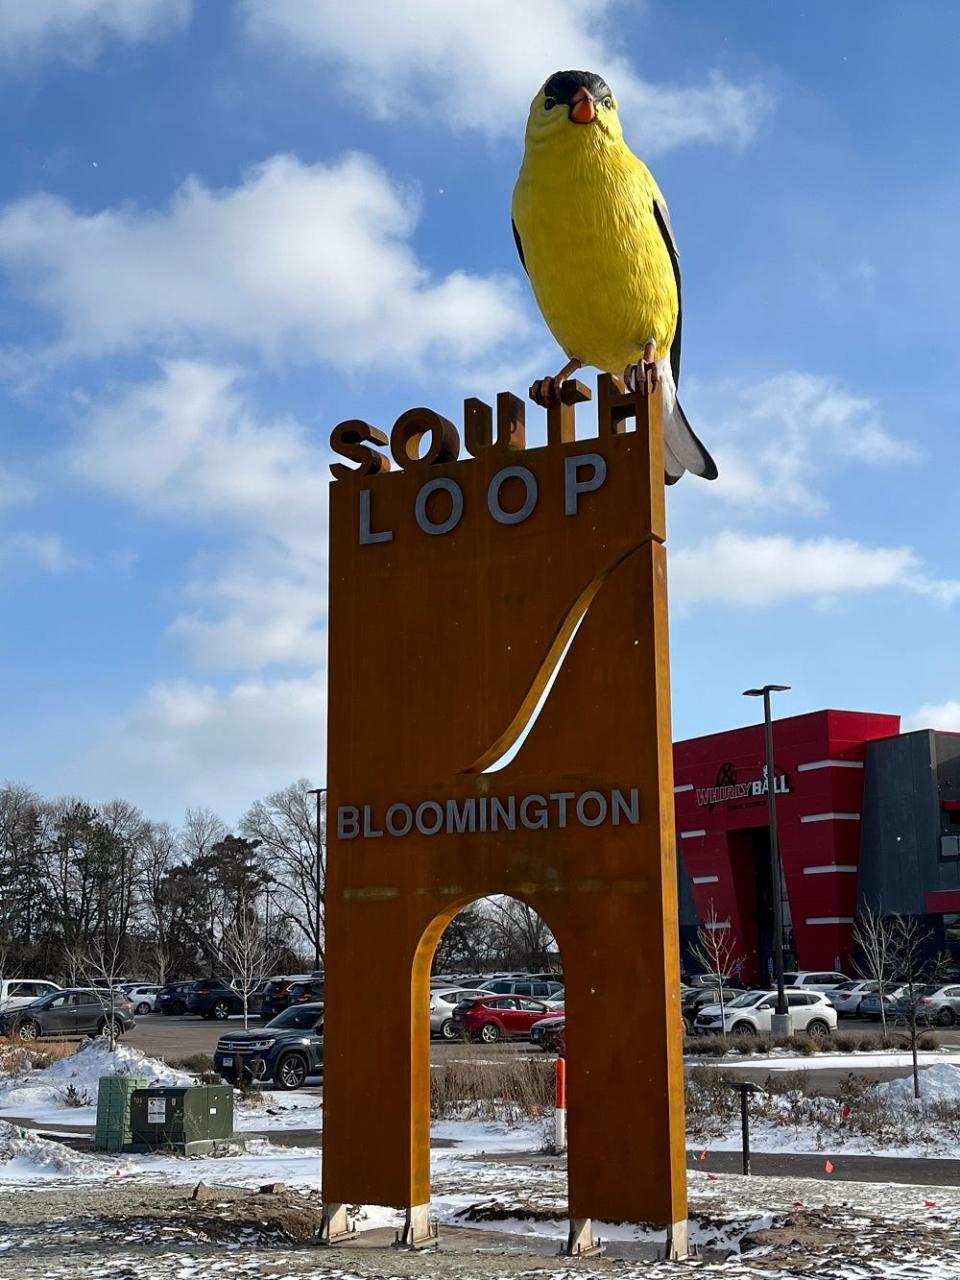 The Goldfinch, a public art installation in Bloomington, Minnesota, aims to "help create a more distinctive sense of place and identity." Created by artist Donald Lipski, the city said the piece "was inspired by the 250+ migratory birds that pass through the Minnesota Valley National Wildlife Refuge."